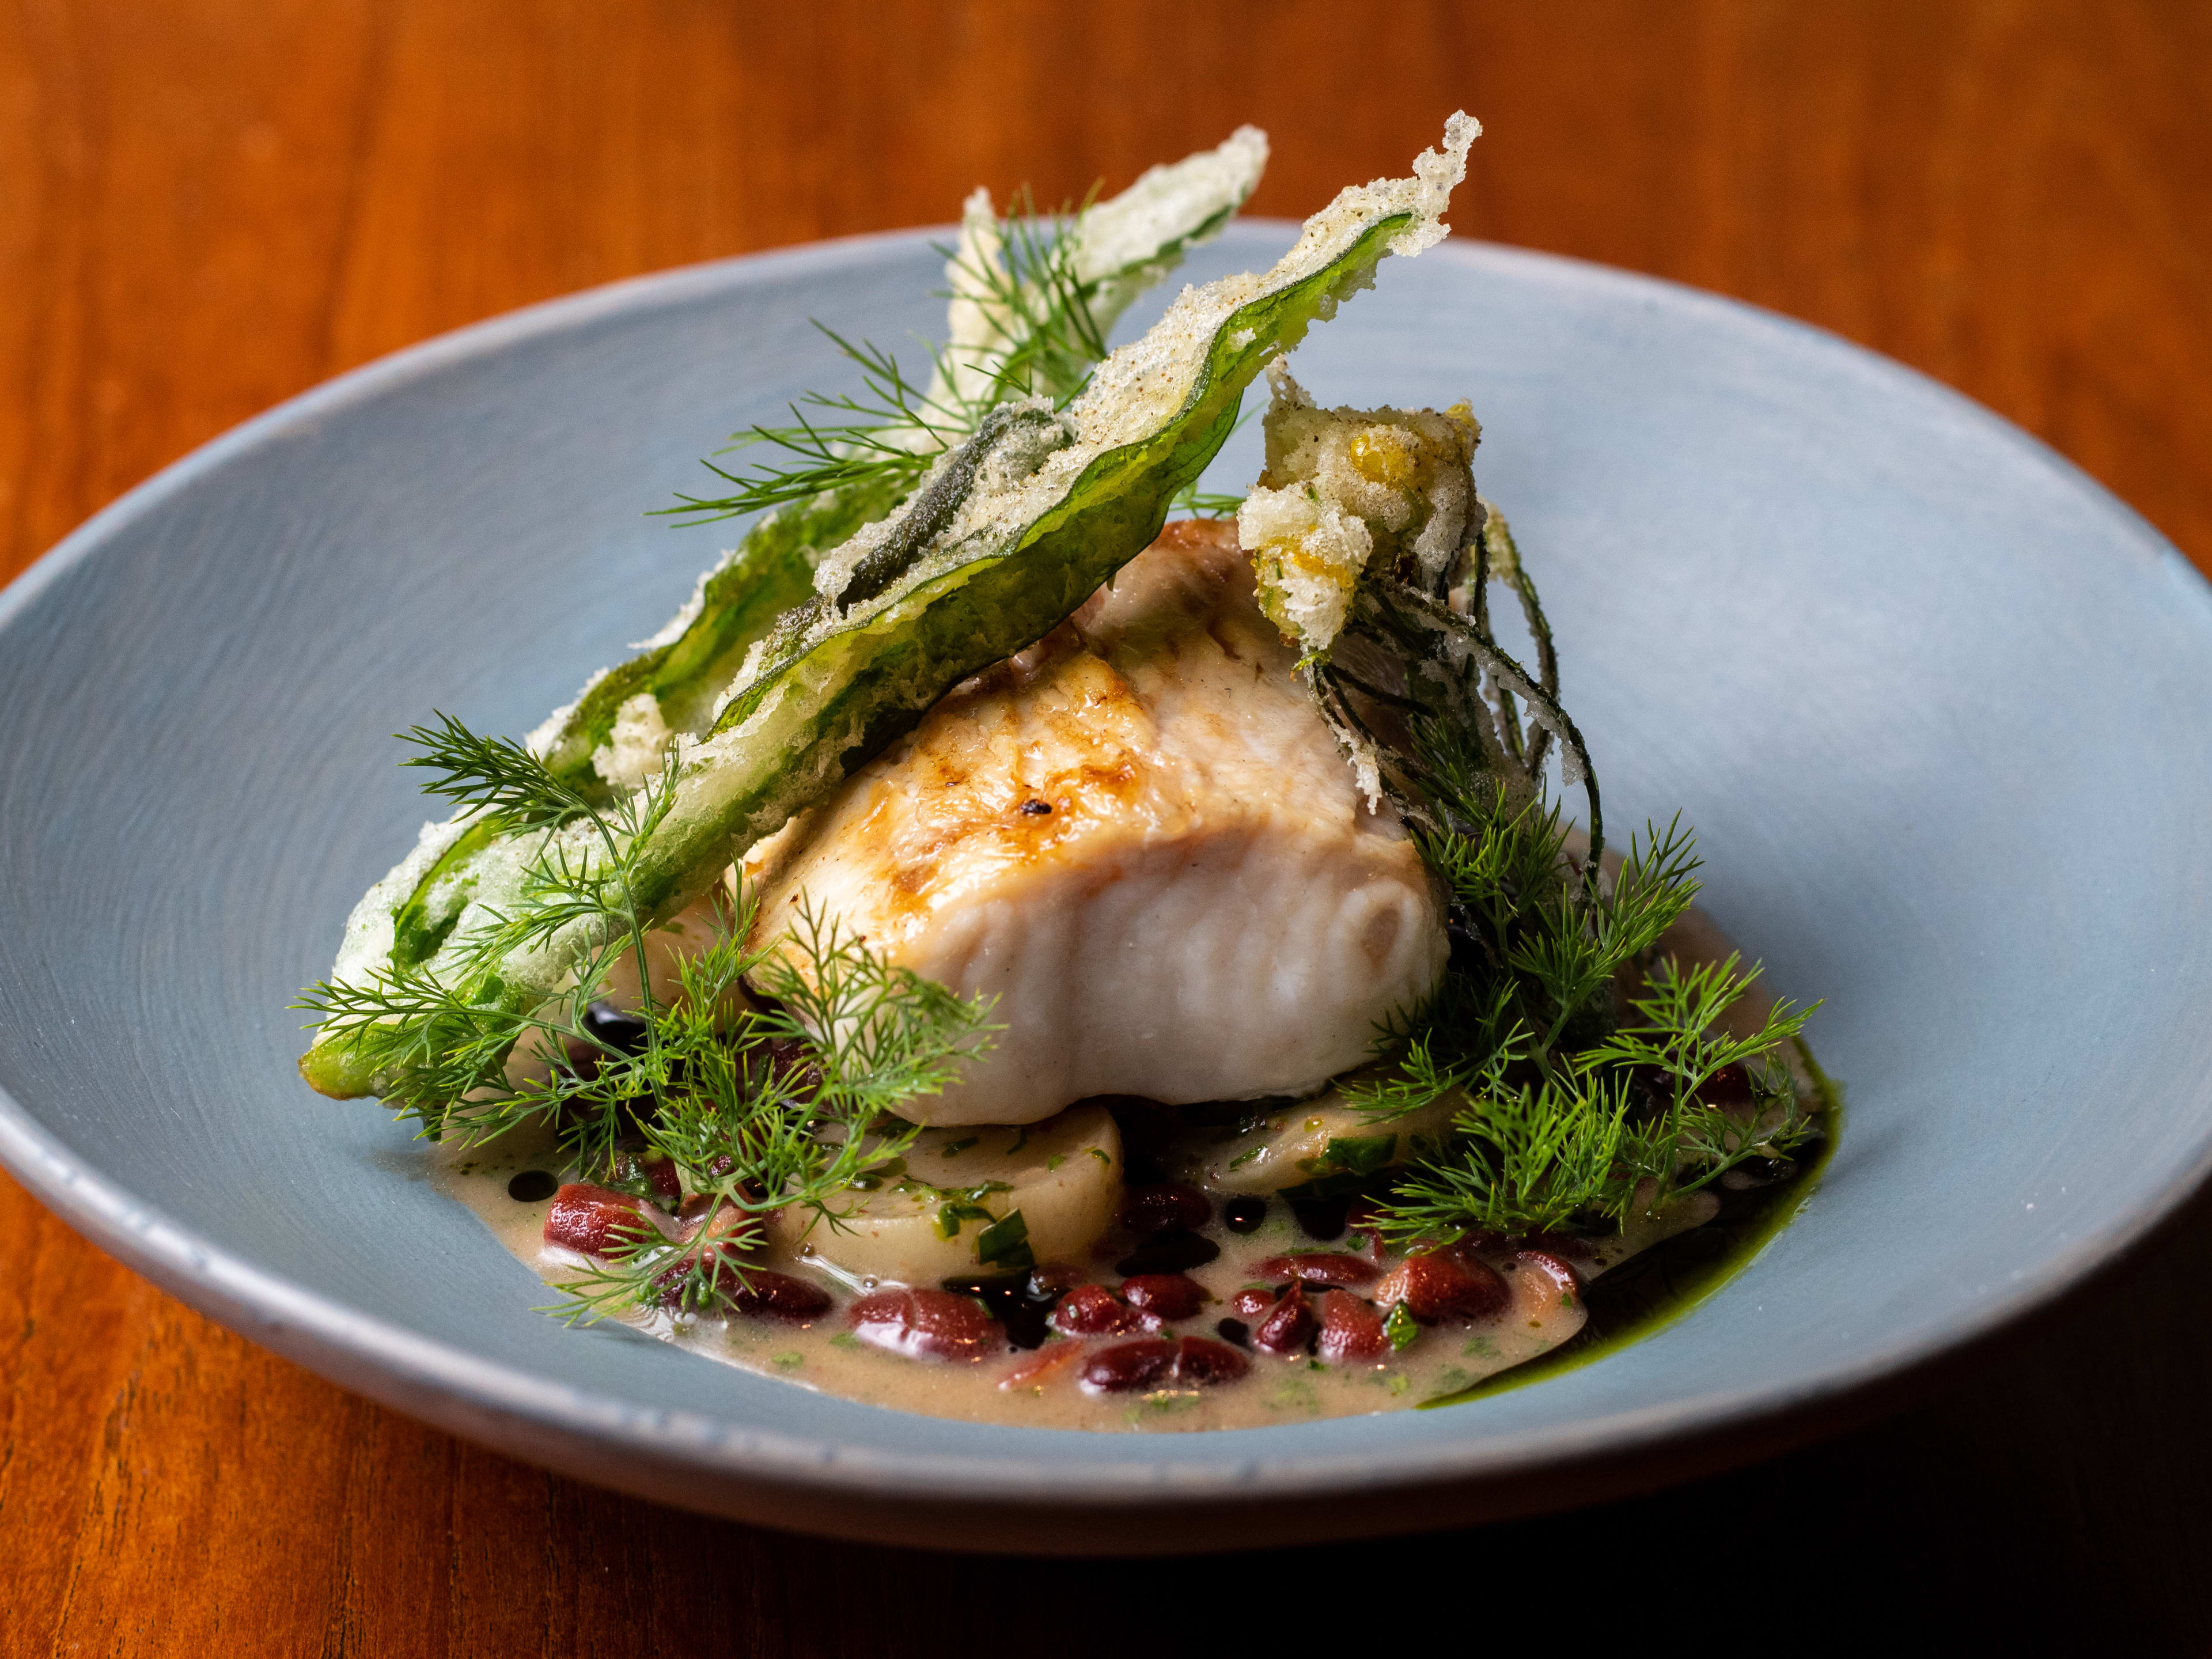 A grilled swordfish surrounded by herbs.